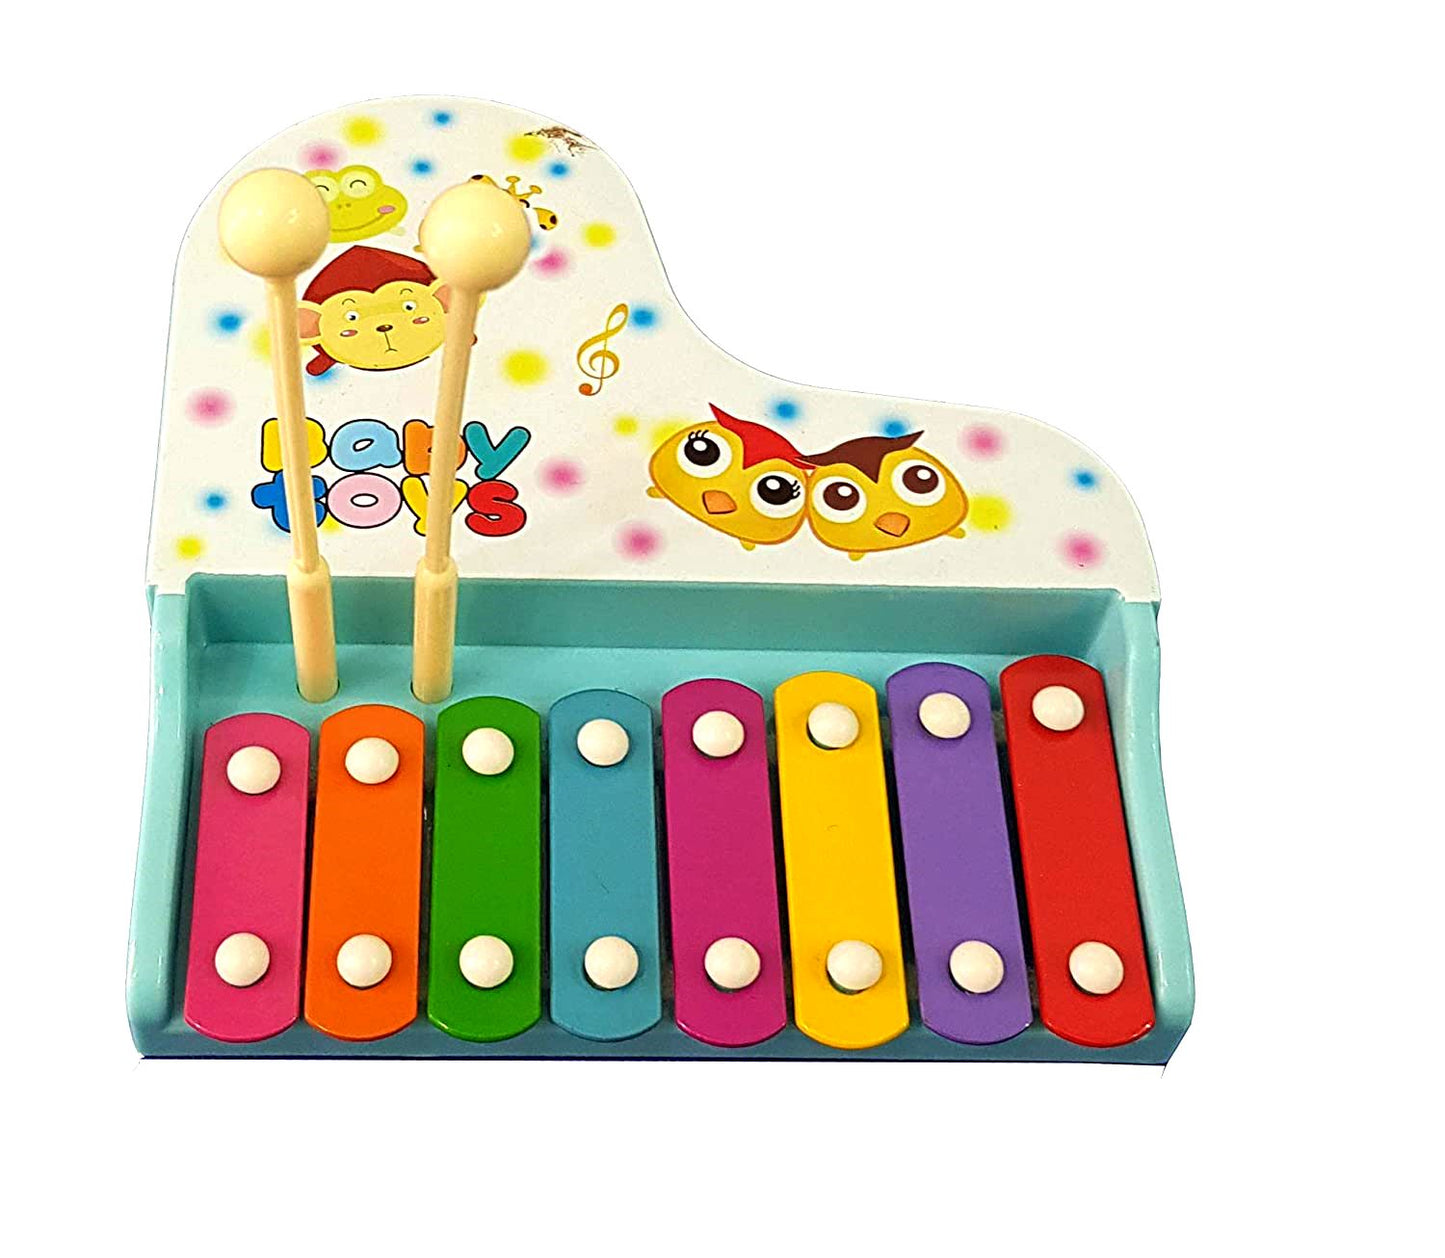 AZi® Musical Mini Xylophone for Kids, Sounding Toy for 1 Years and Above. (Multicolor)